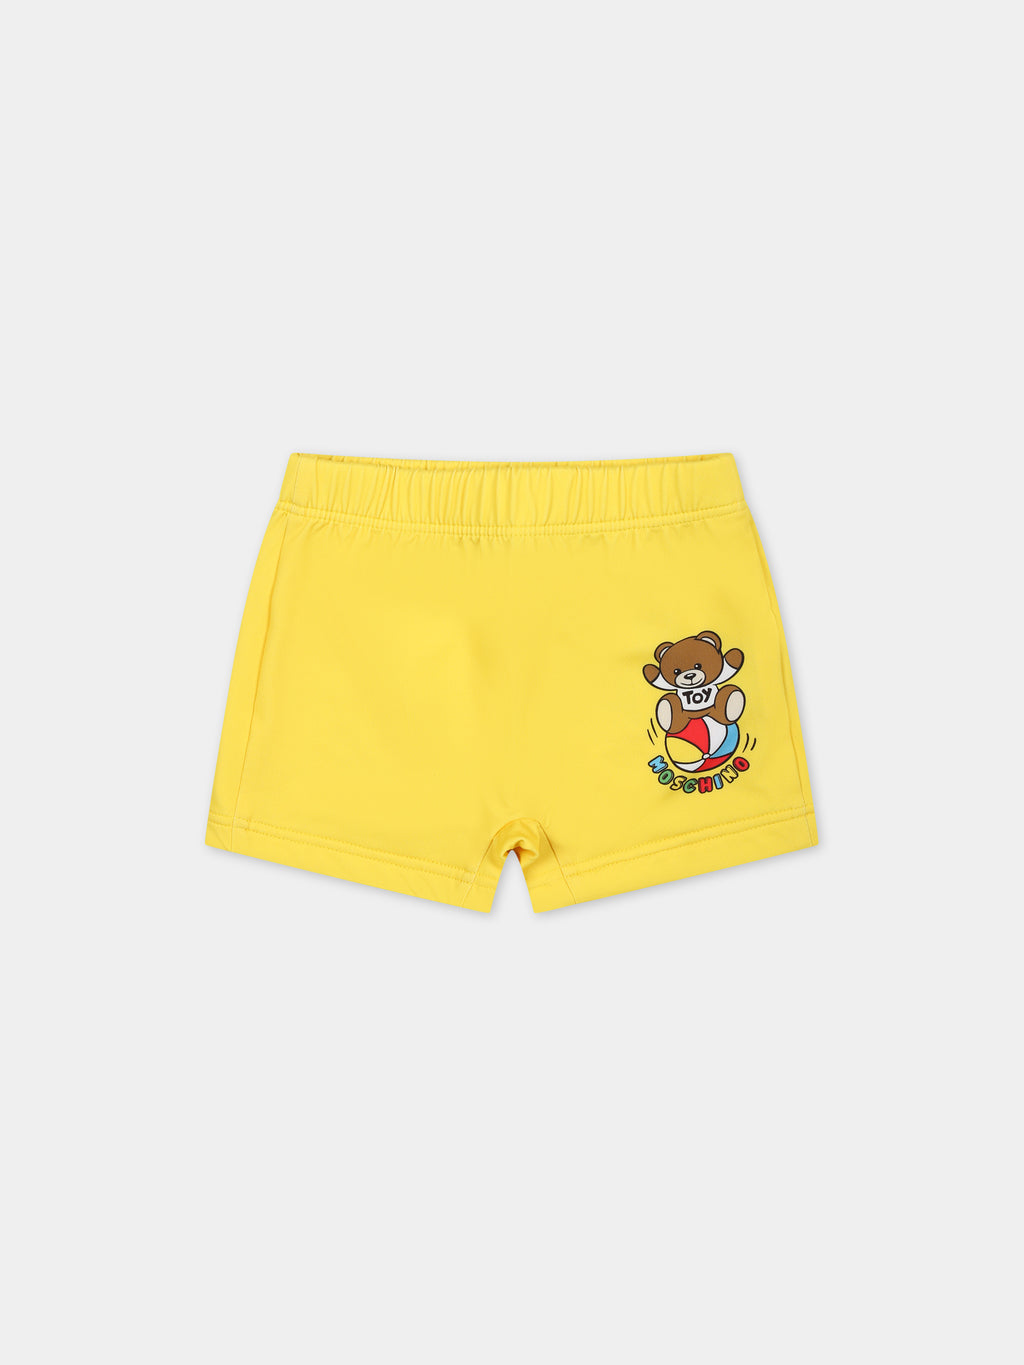 Yellow swimsuit for baby boy with Teddy bear and multicolor logo